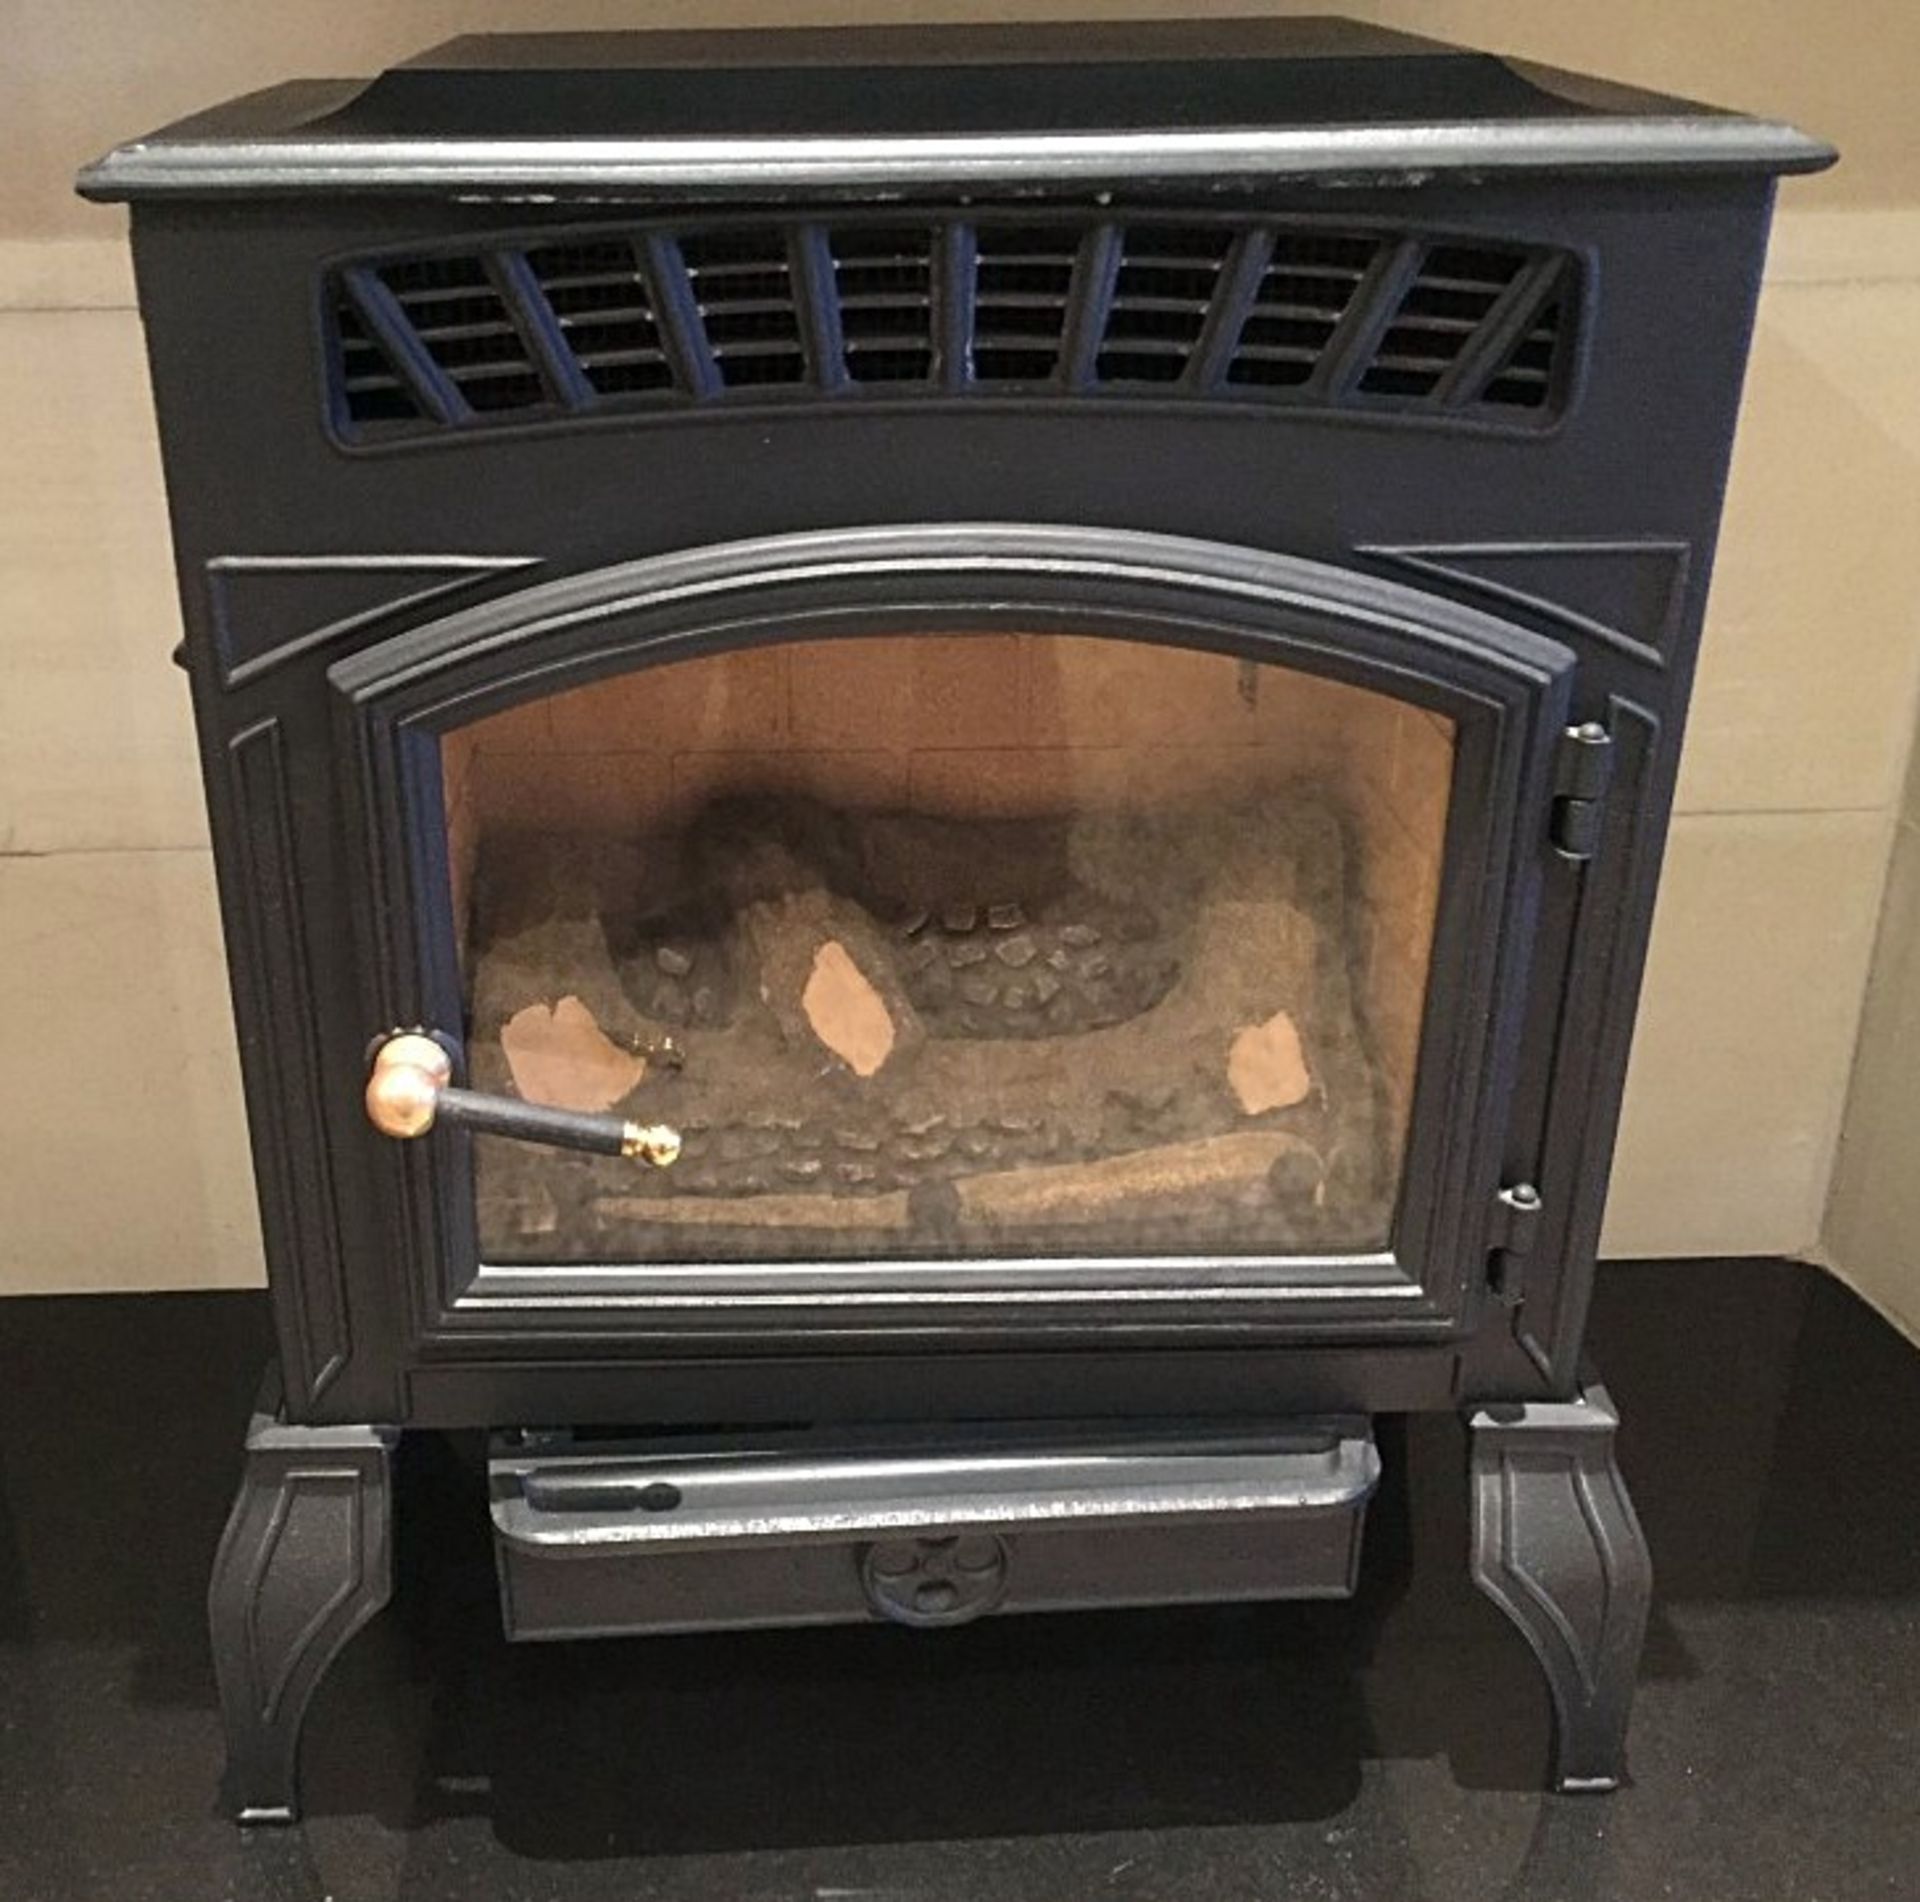 1 x Cast Iron Gas Fire - Dimensions: Width 54 x Depth 30 x Height 62cm - Preowned In Good Working